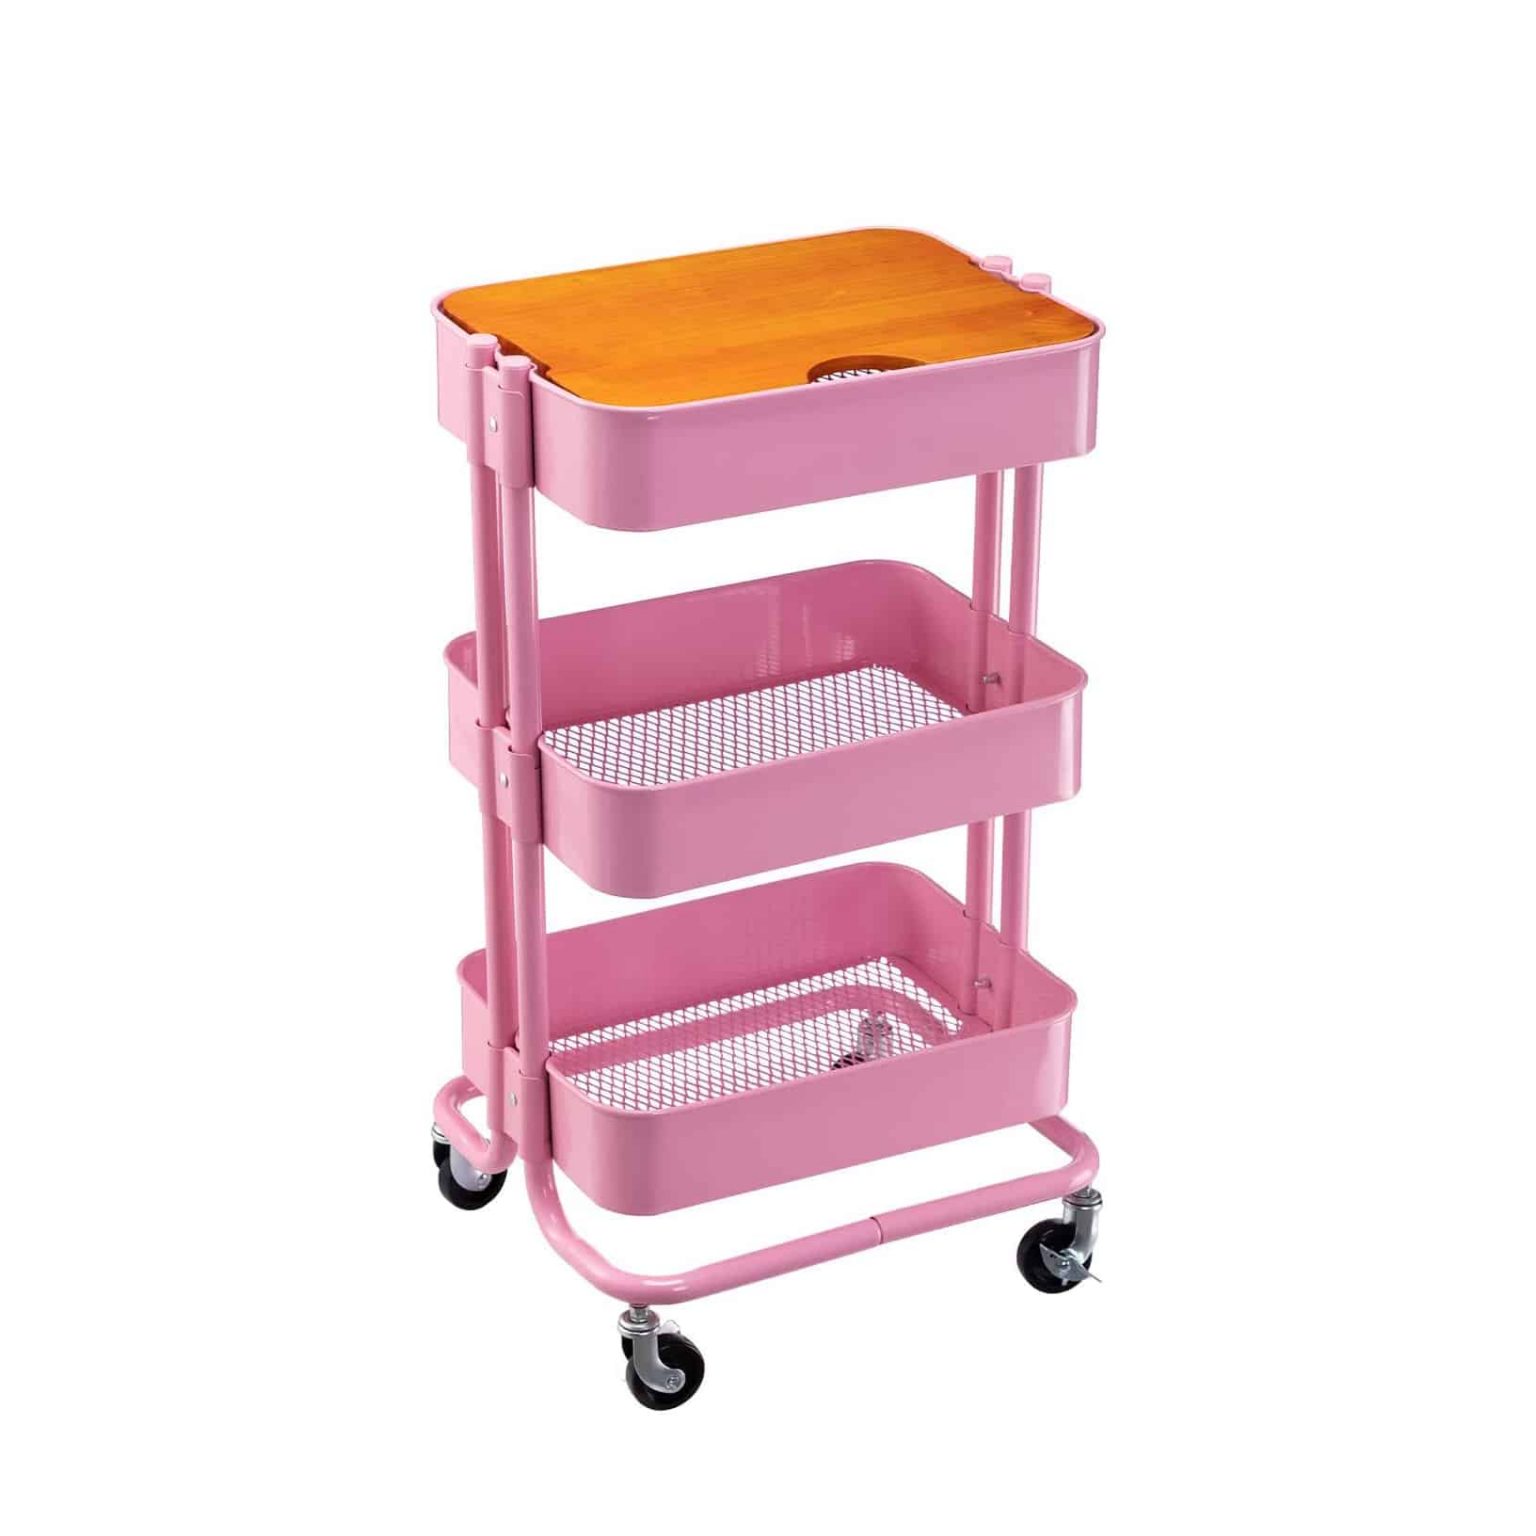 Top 10 Best Rolling Storage Carts in 2021 Reviews | Guide